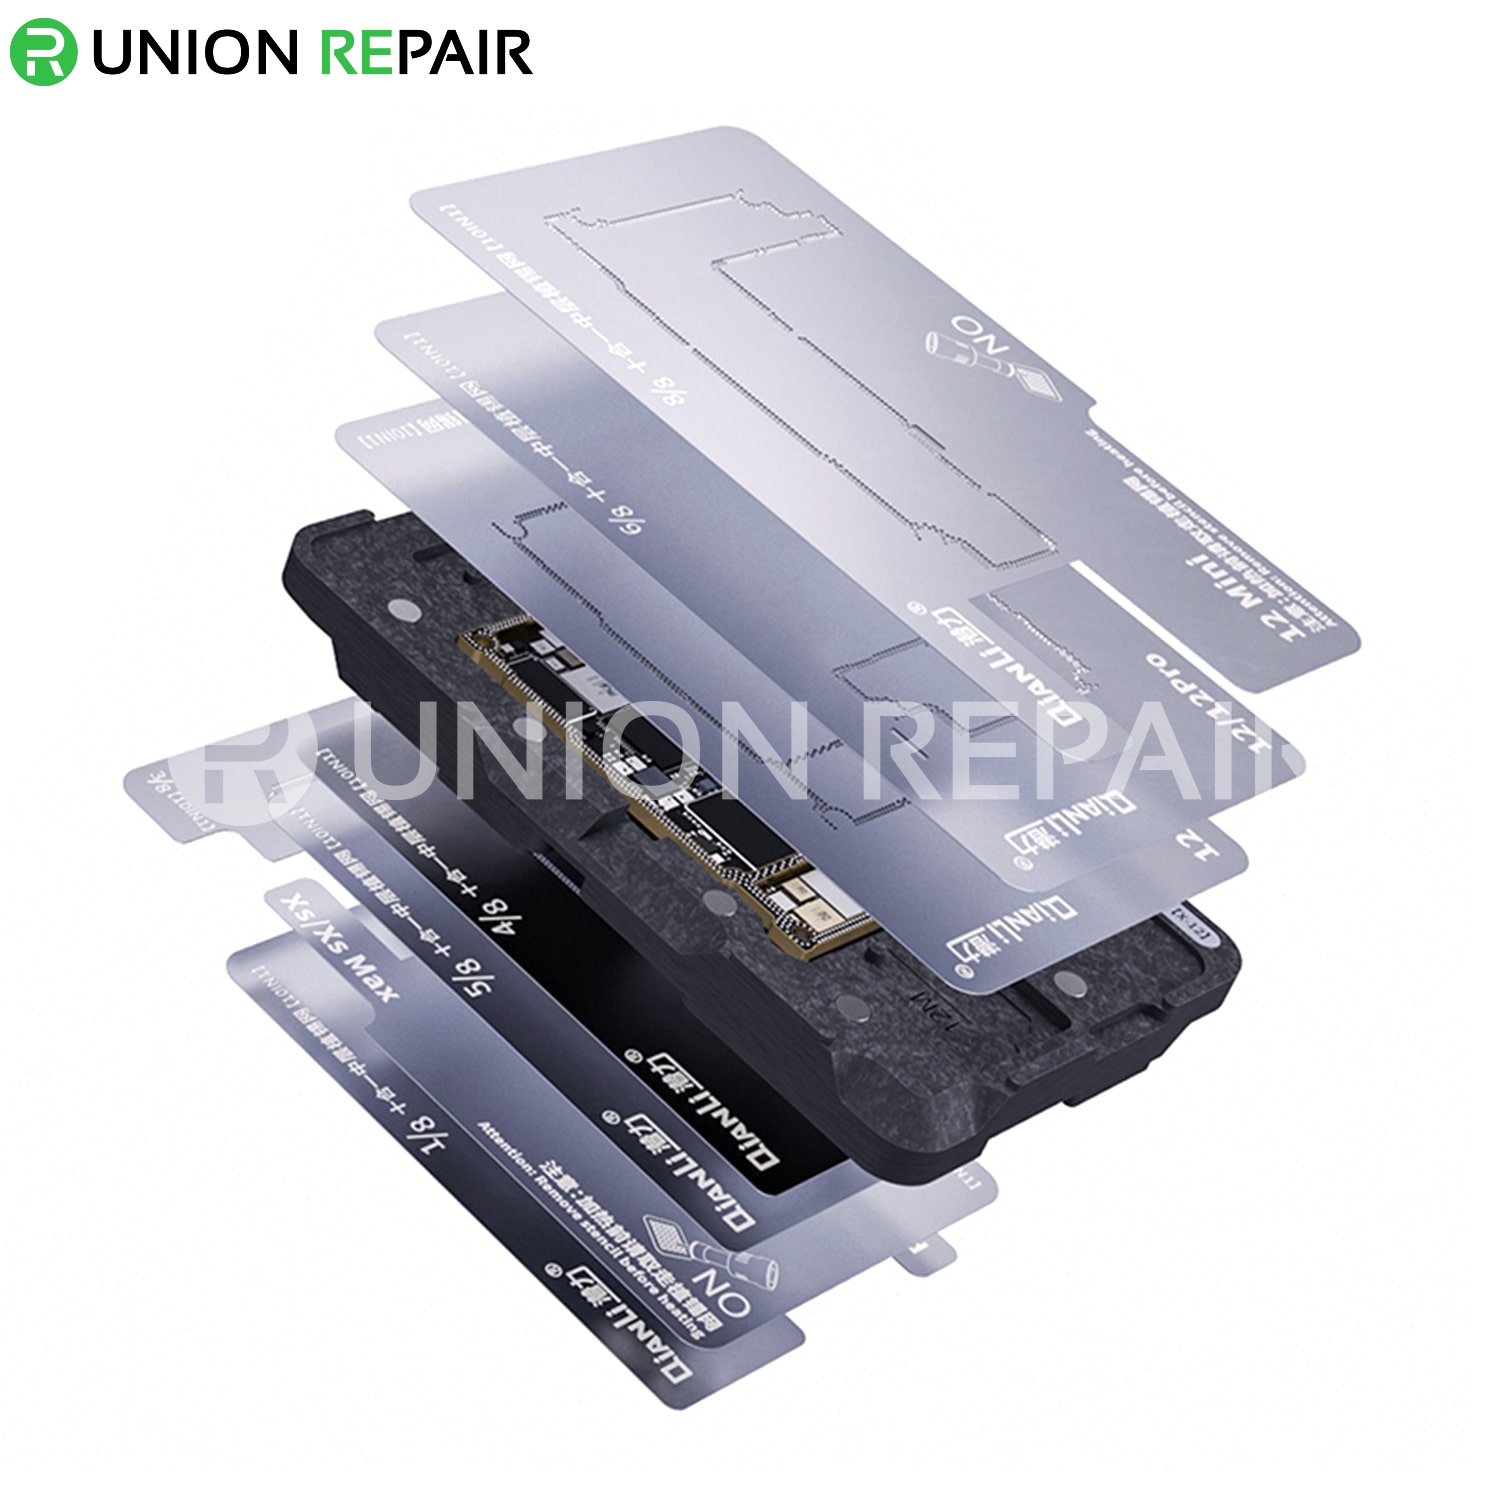 QIANLI 10IN1 Mid Frame Reballing Platform for iPhone X-12 Pro Max